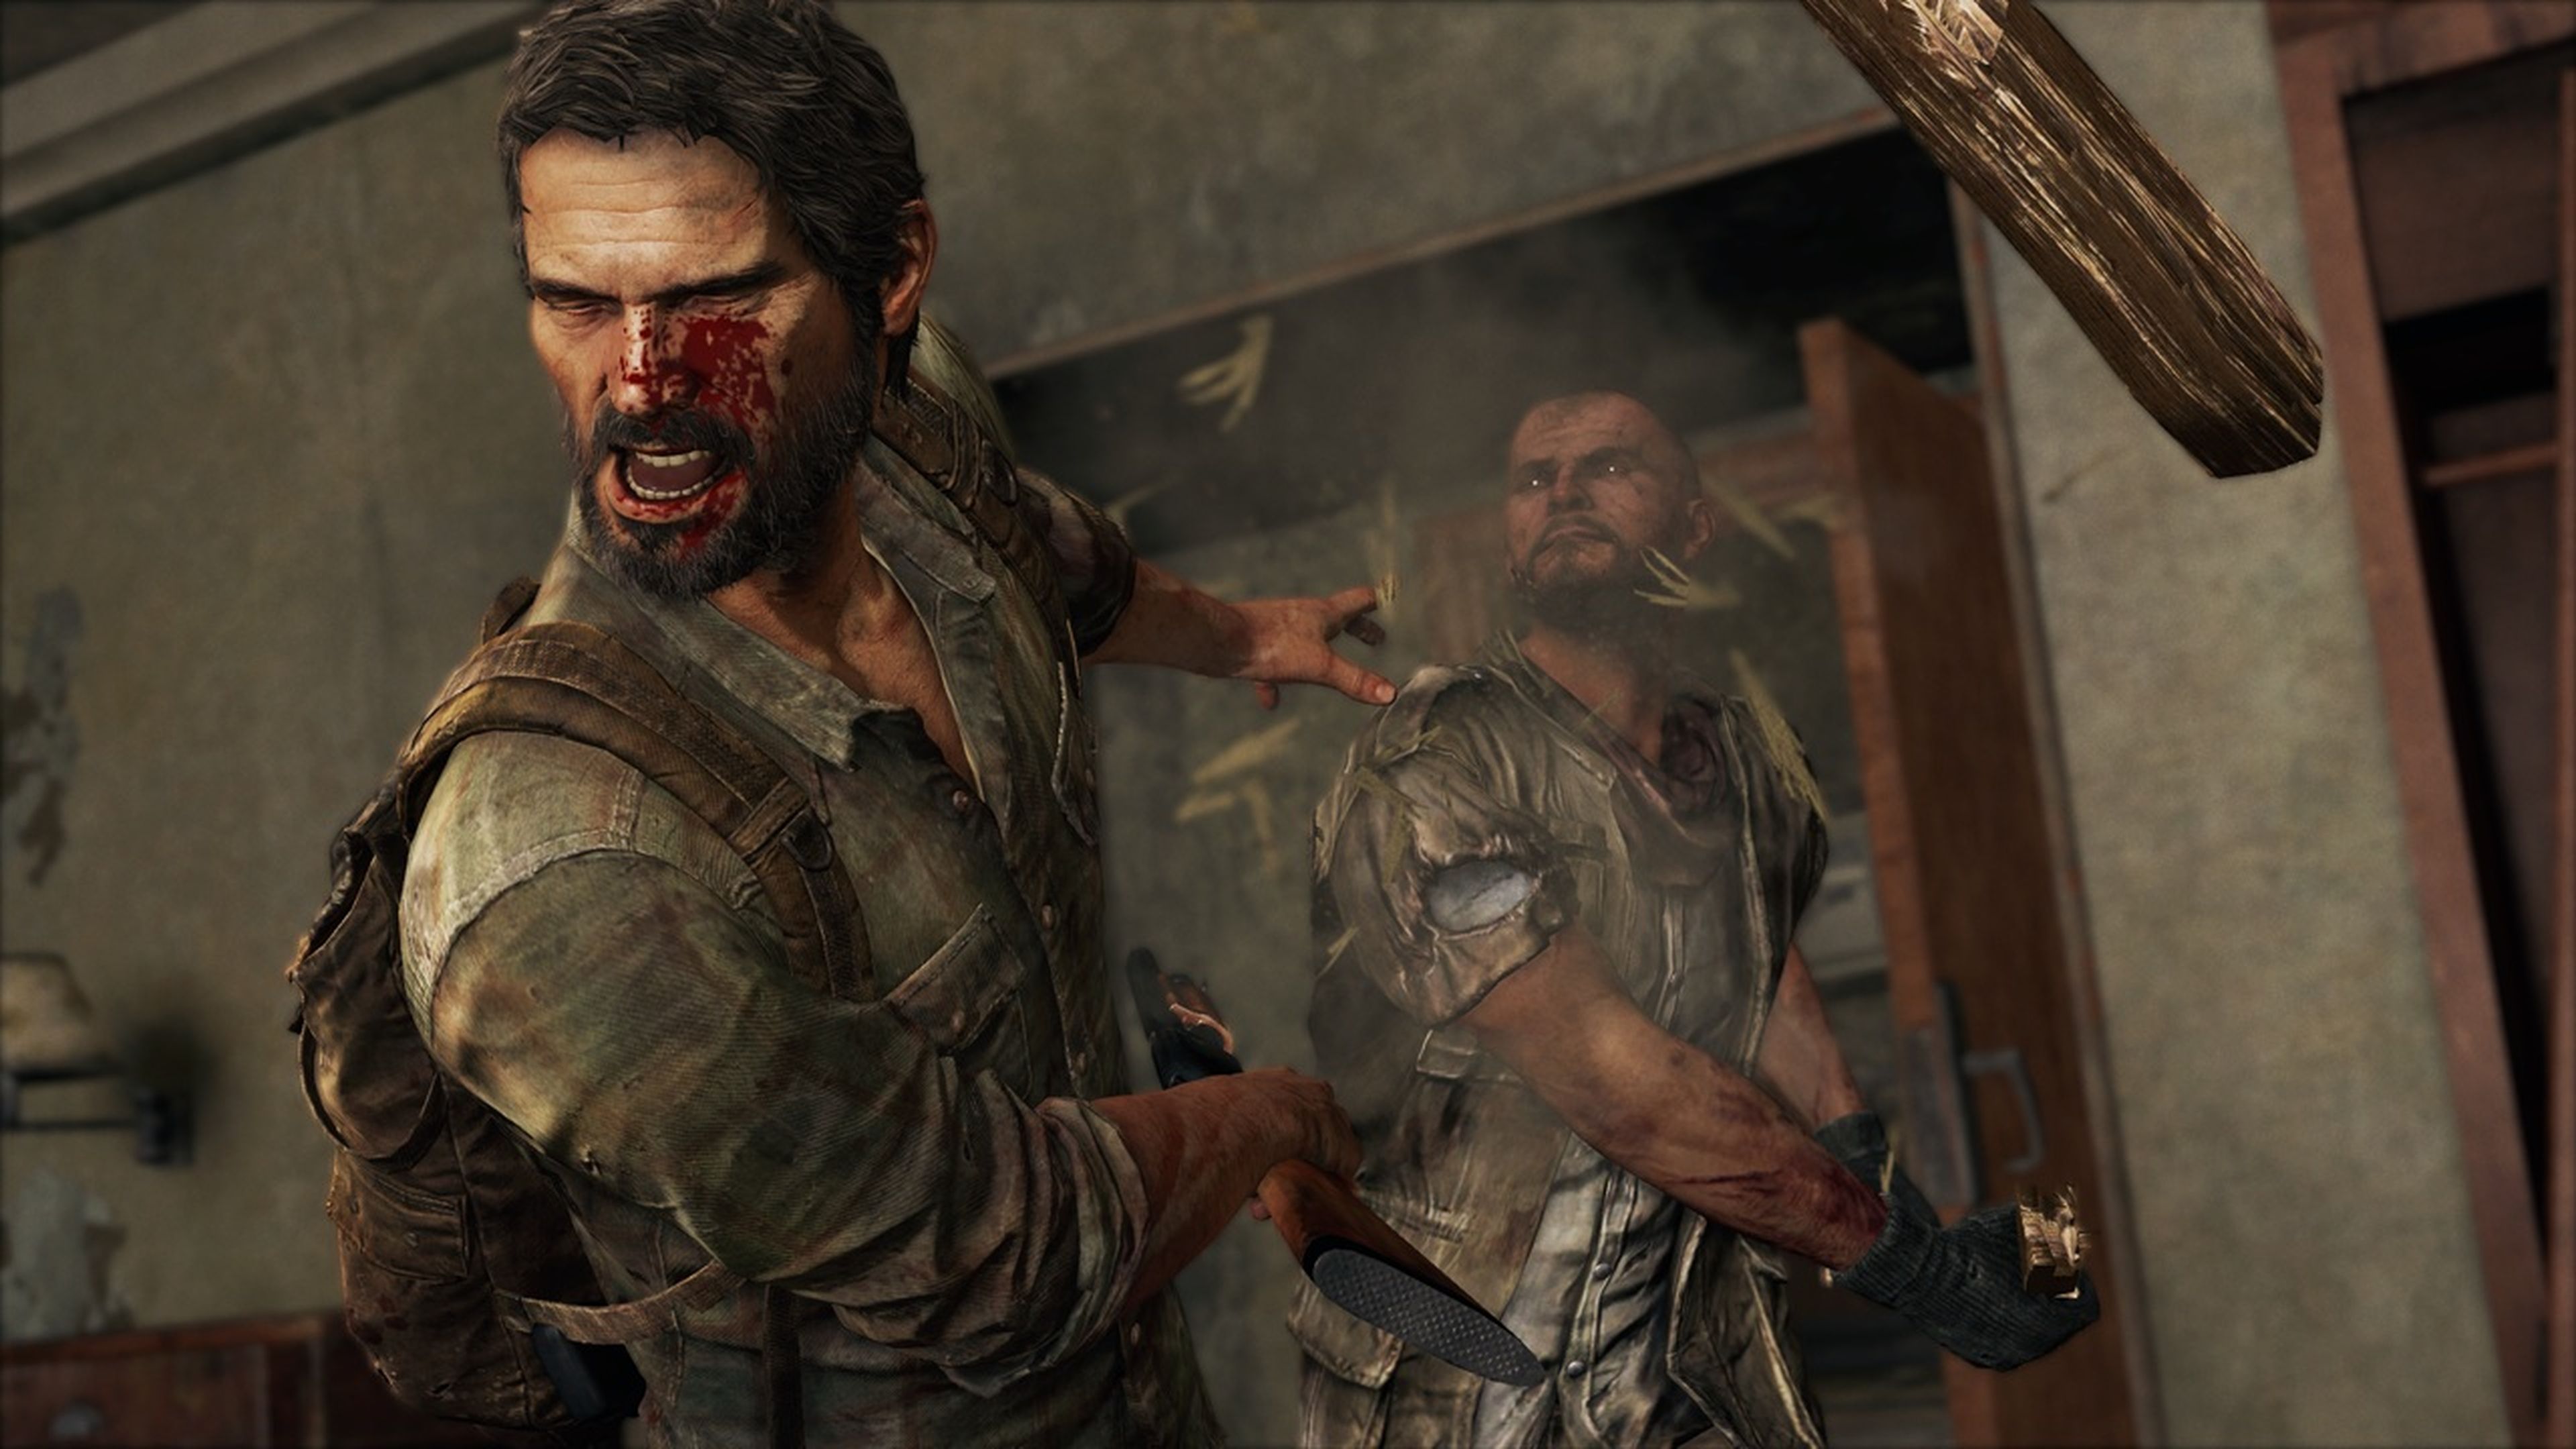 E3 2012: The Last of Us, vídeo gameplay